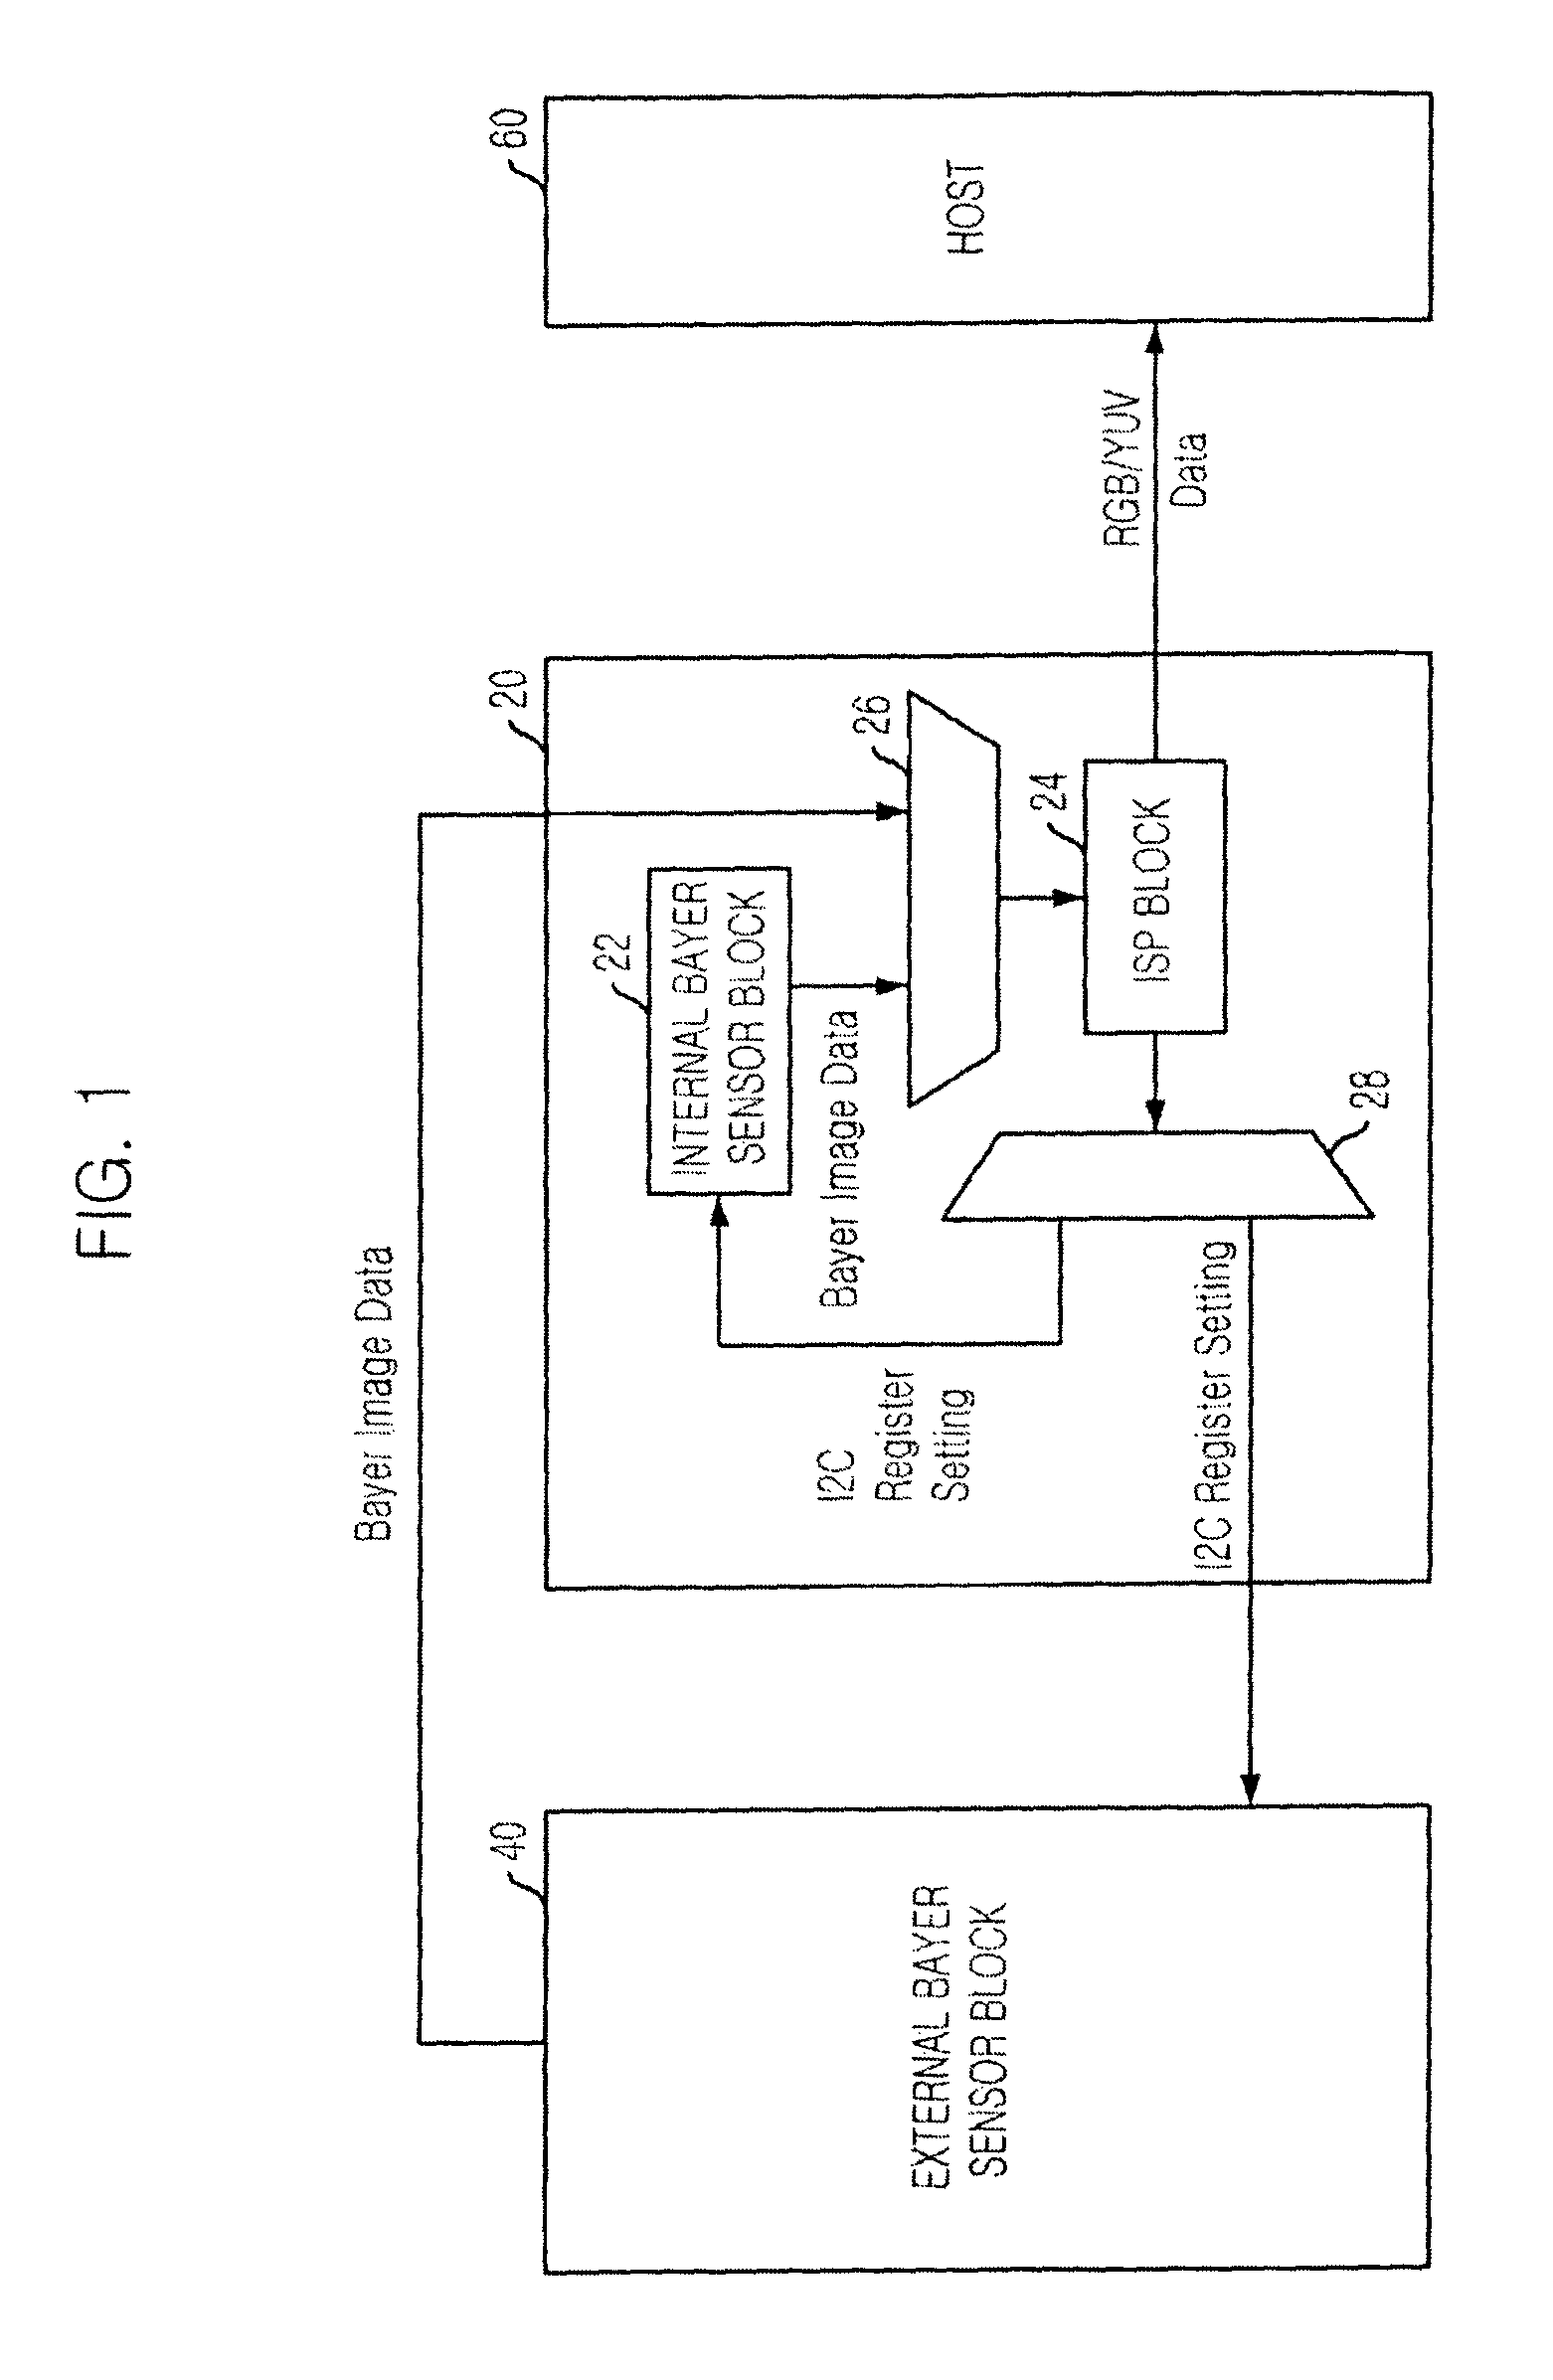 Image sensor with built-in ISP and dual camera system